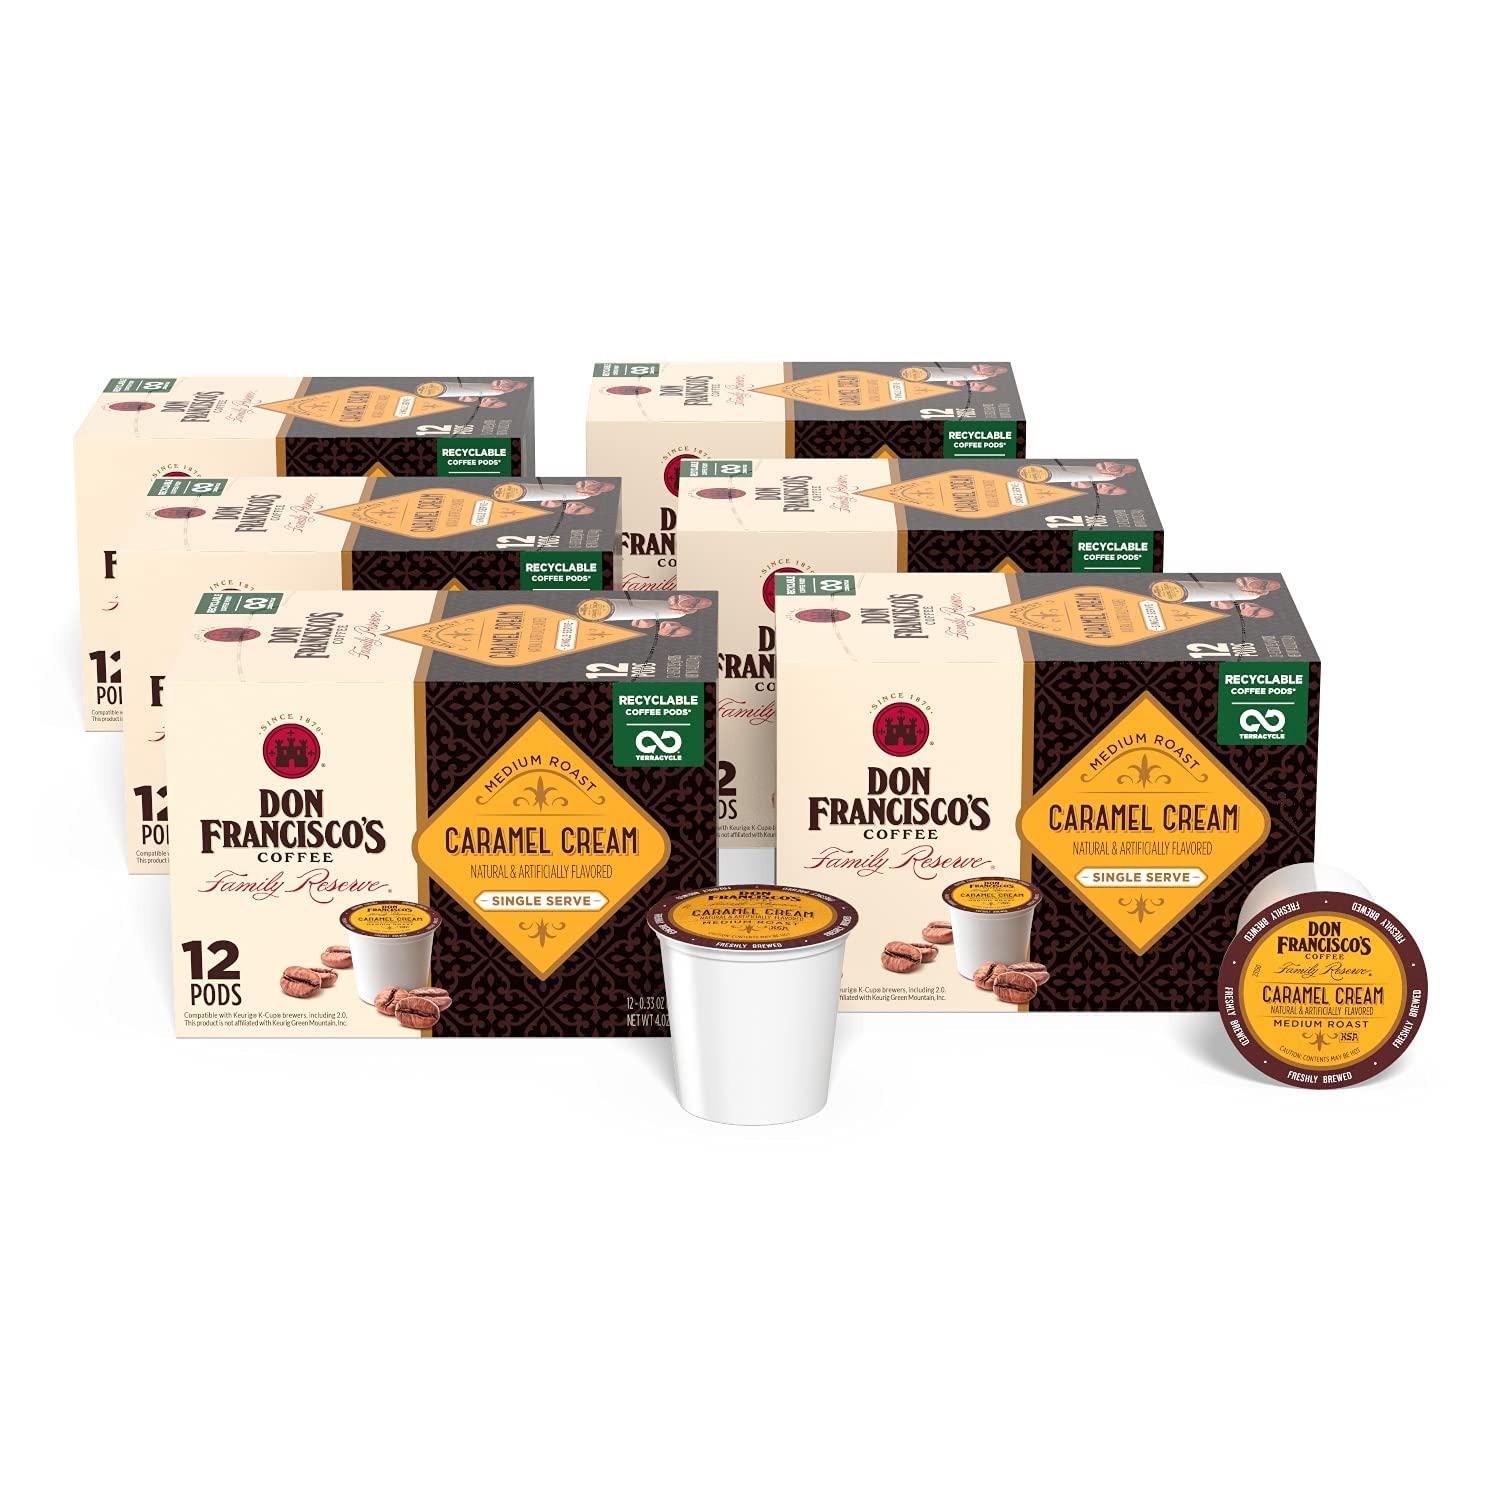 Don Francisco's Caramel Cream Flavored Medium Roast Coffee Pods - 72 Count - Recyclable Single-Serve Coffee Pods, Compatible with your K- Cup Keurig Coffee Maker